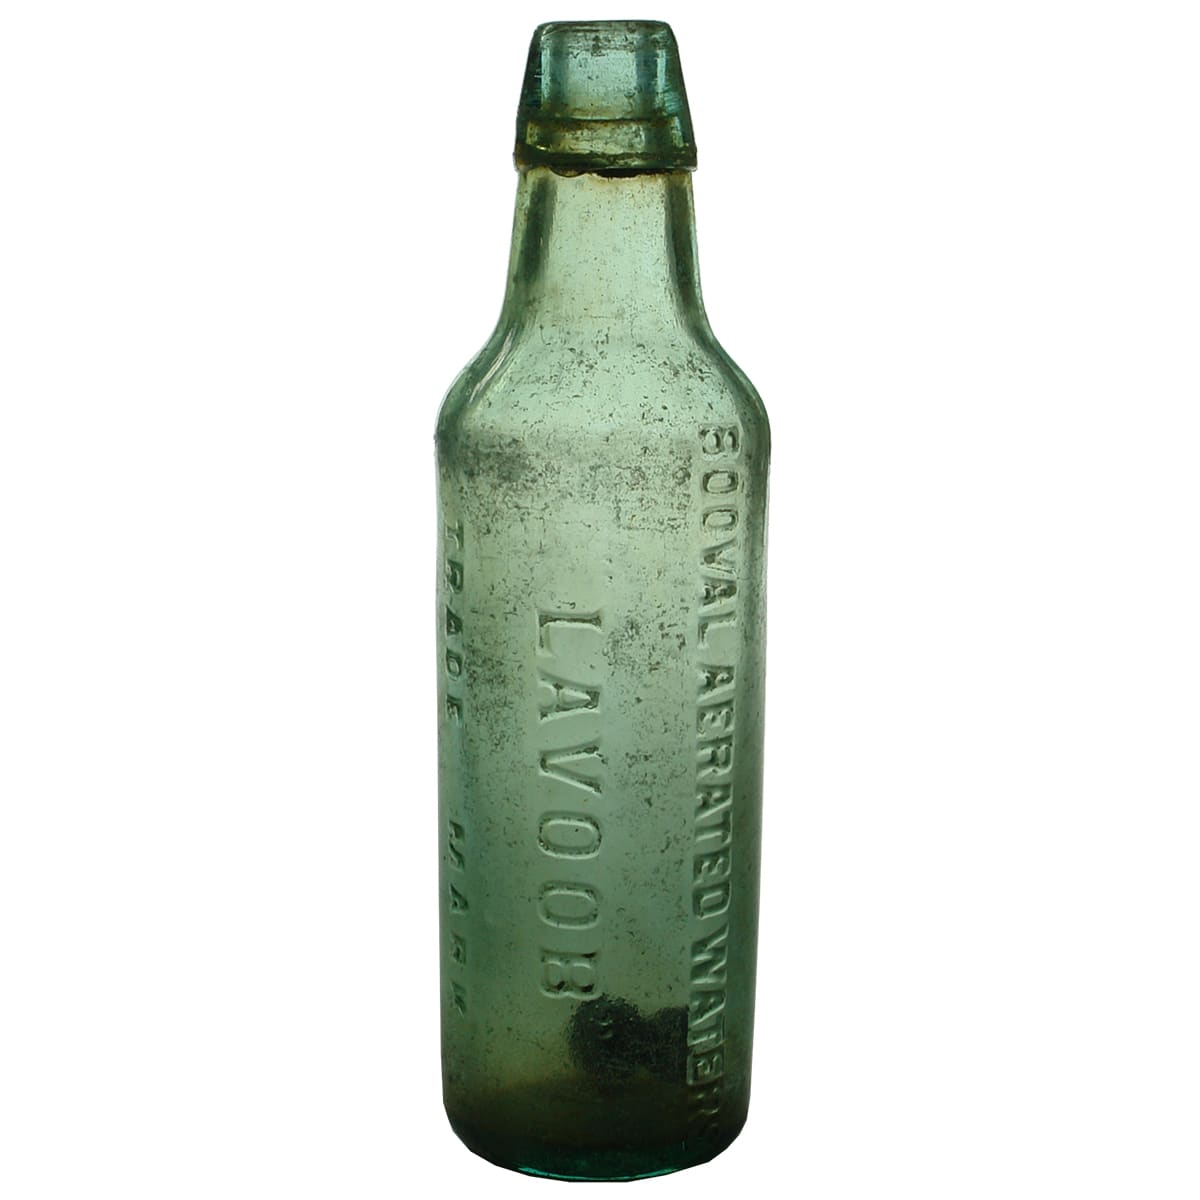 Lamont. Booval Aerated Waters. Lavoob. Aqua. 10 oz. (Ipswich, Queensland)